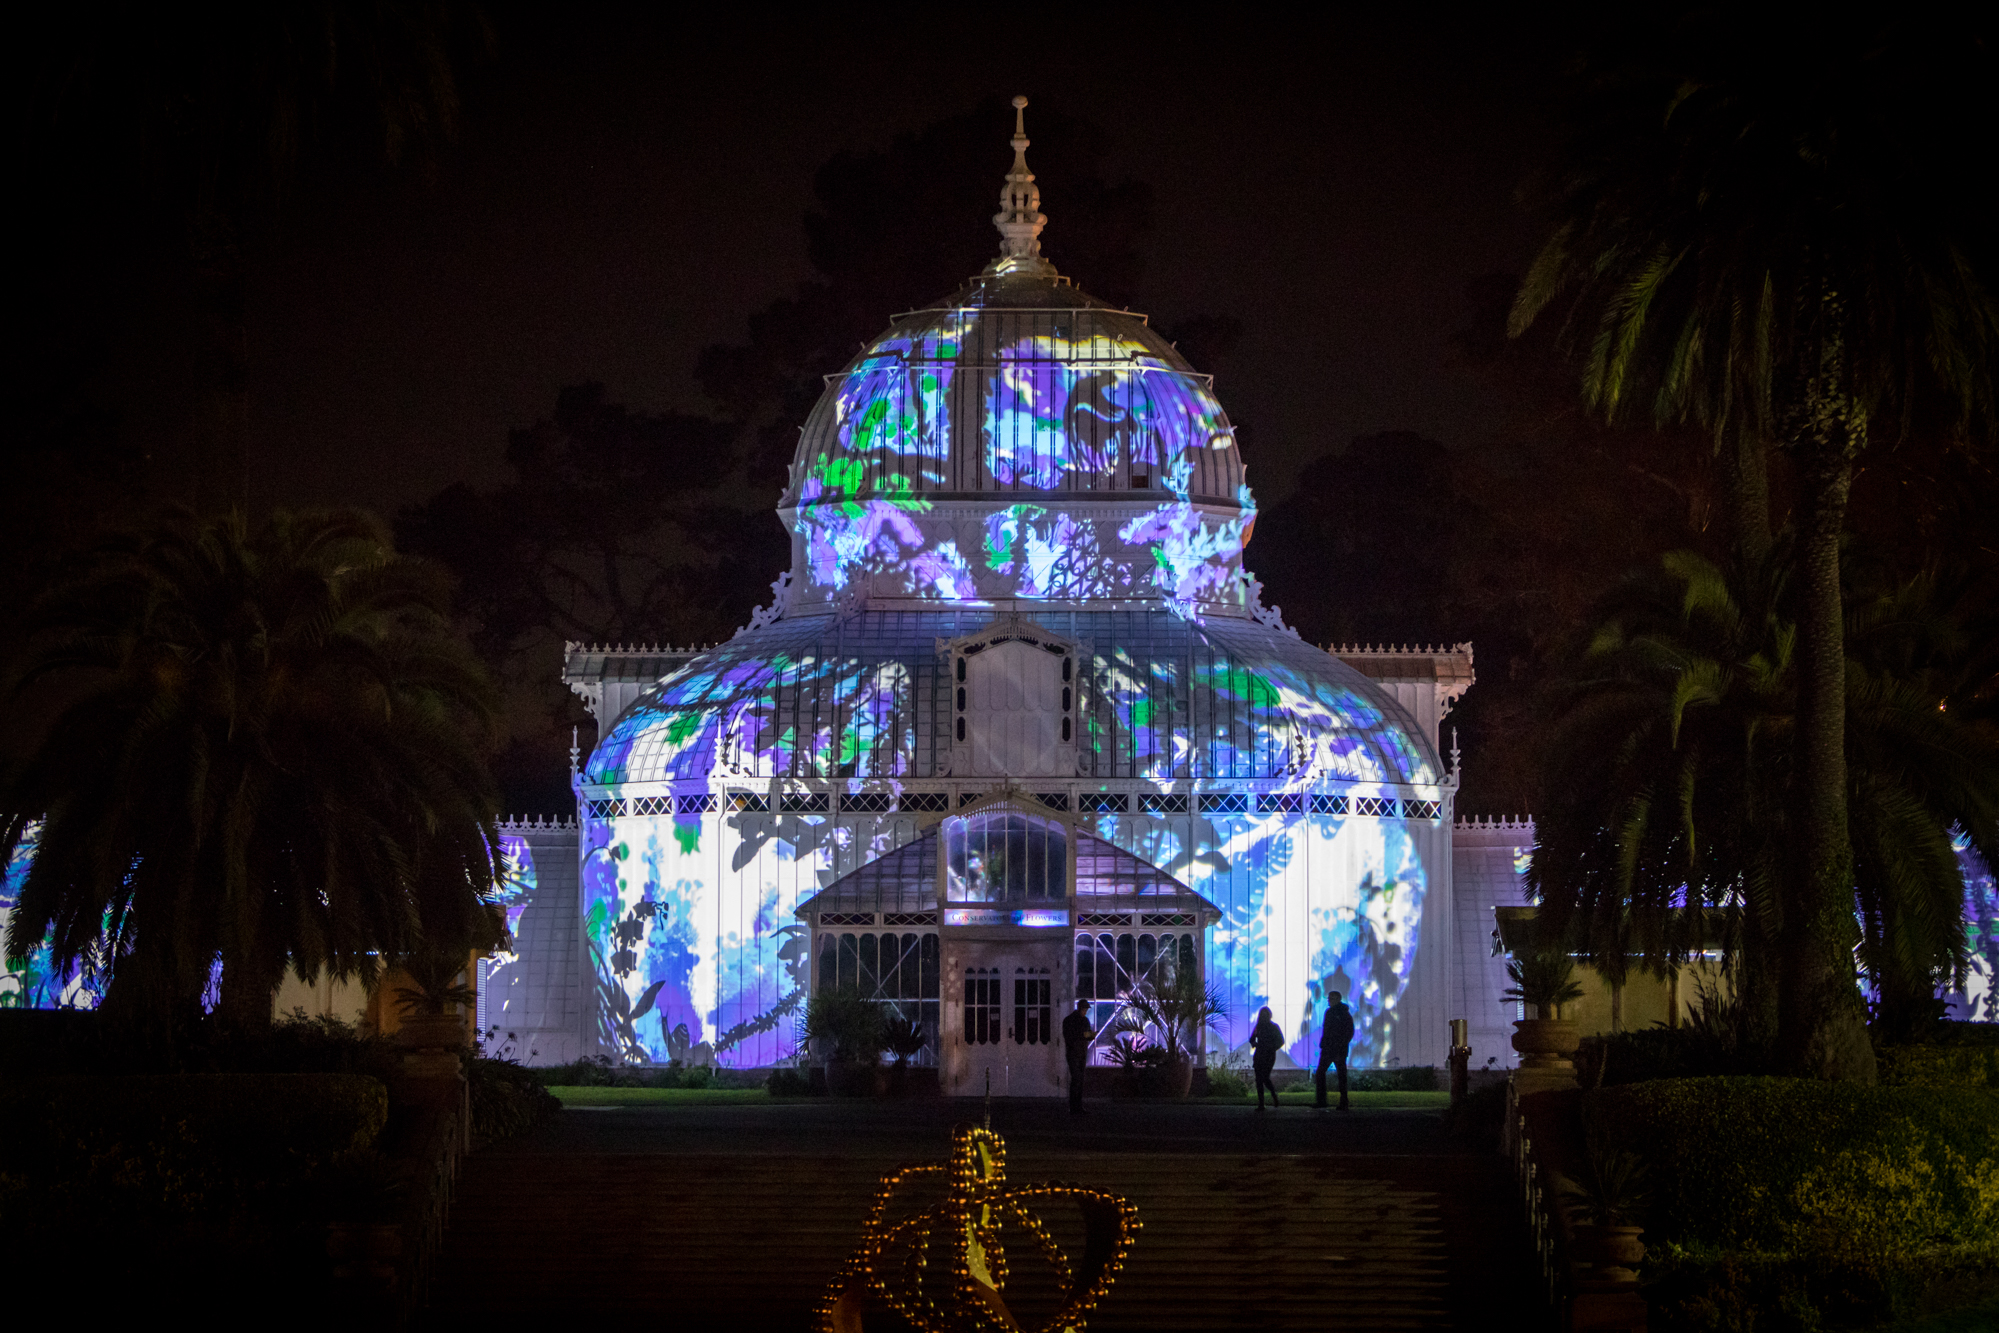 Photosynthesis at the Conservatory of Flowers